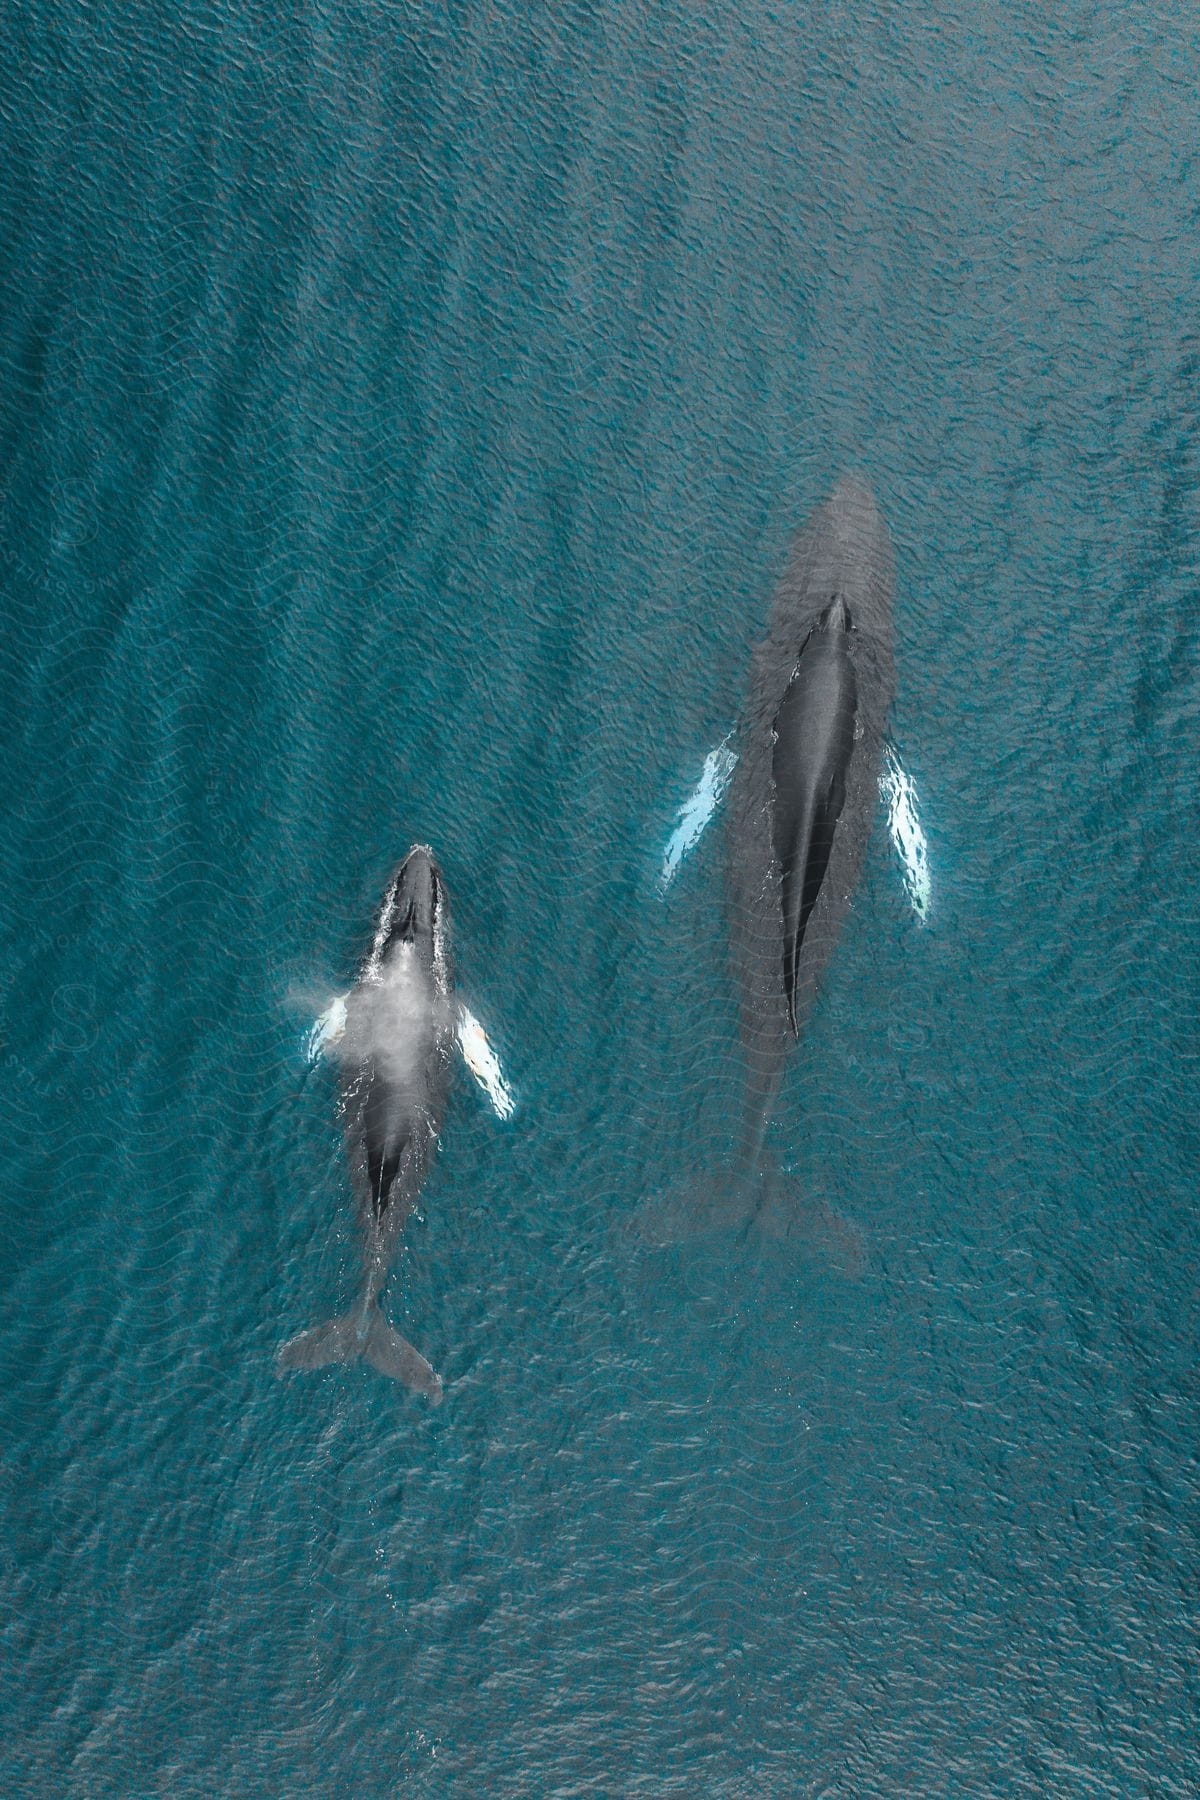 Stock photo of a view of some whales swimming in the ocean.